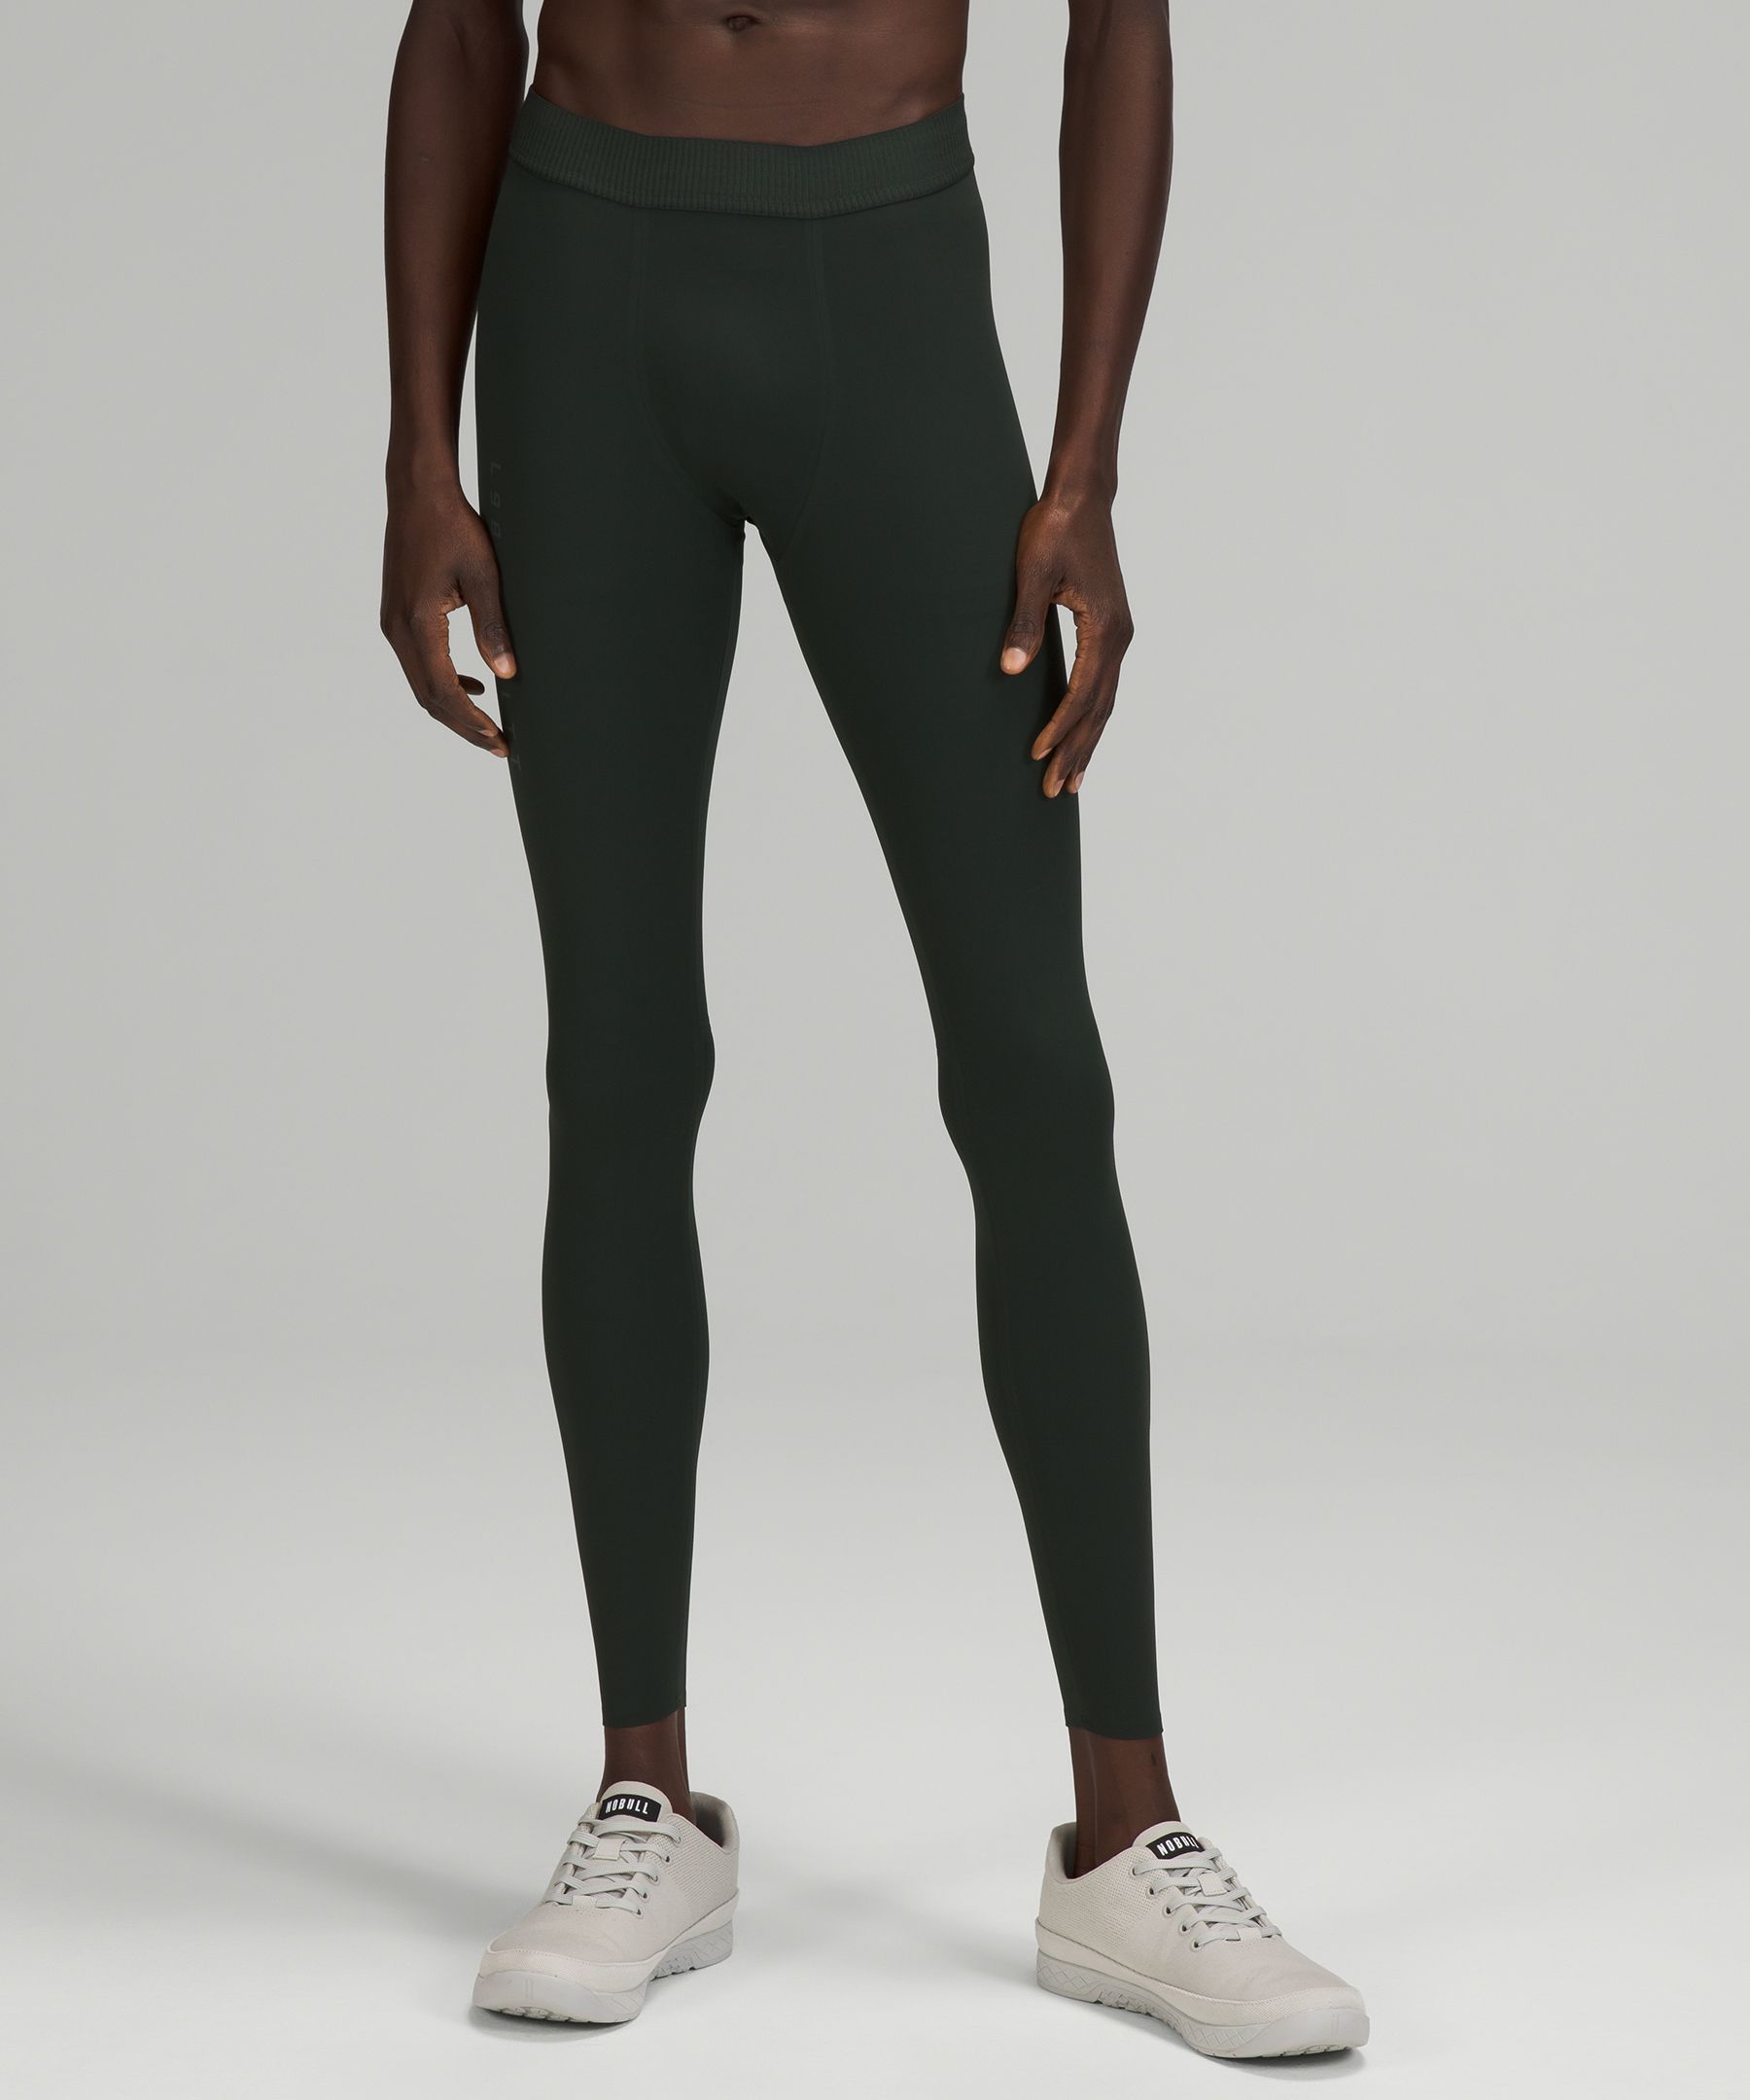 Lululemon License to Train Short Review